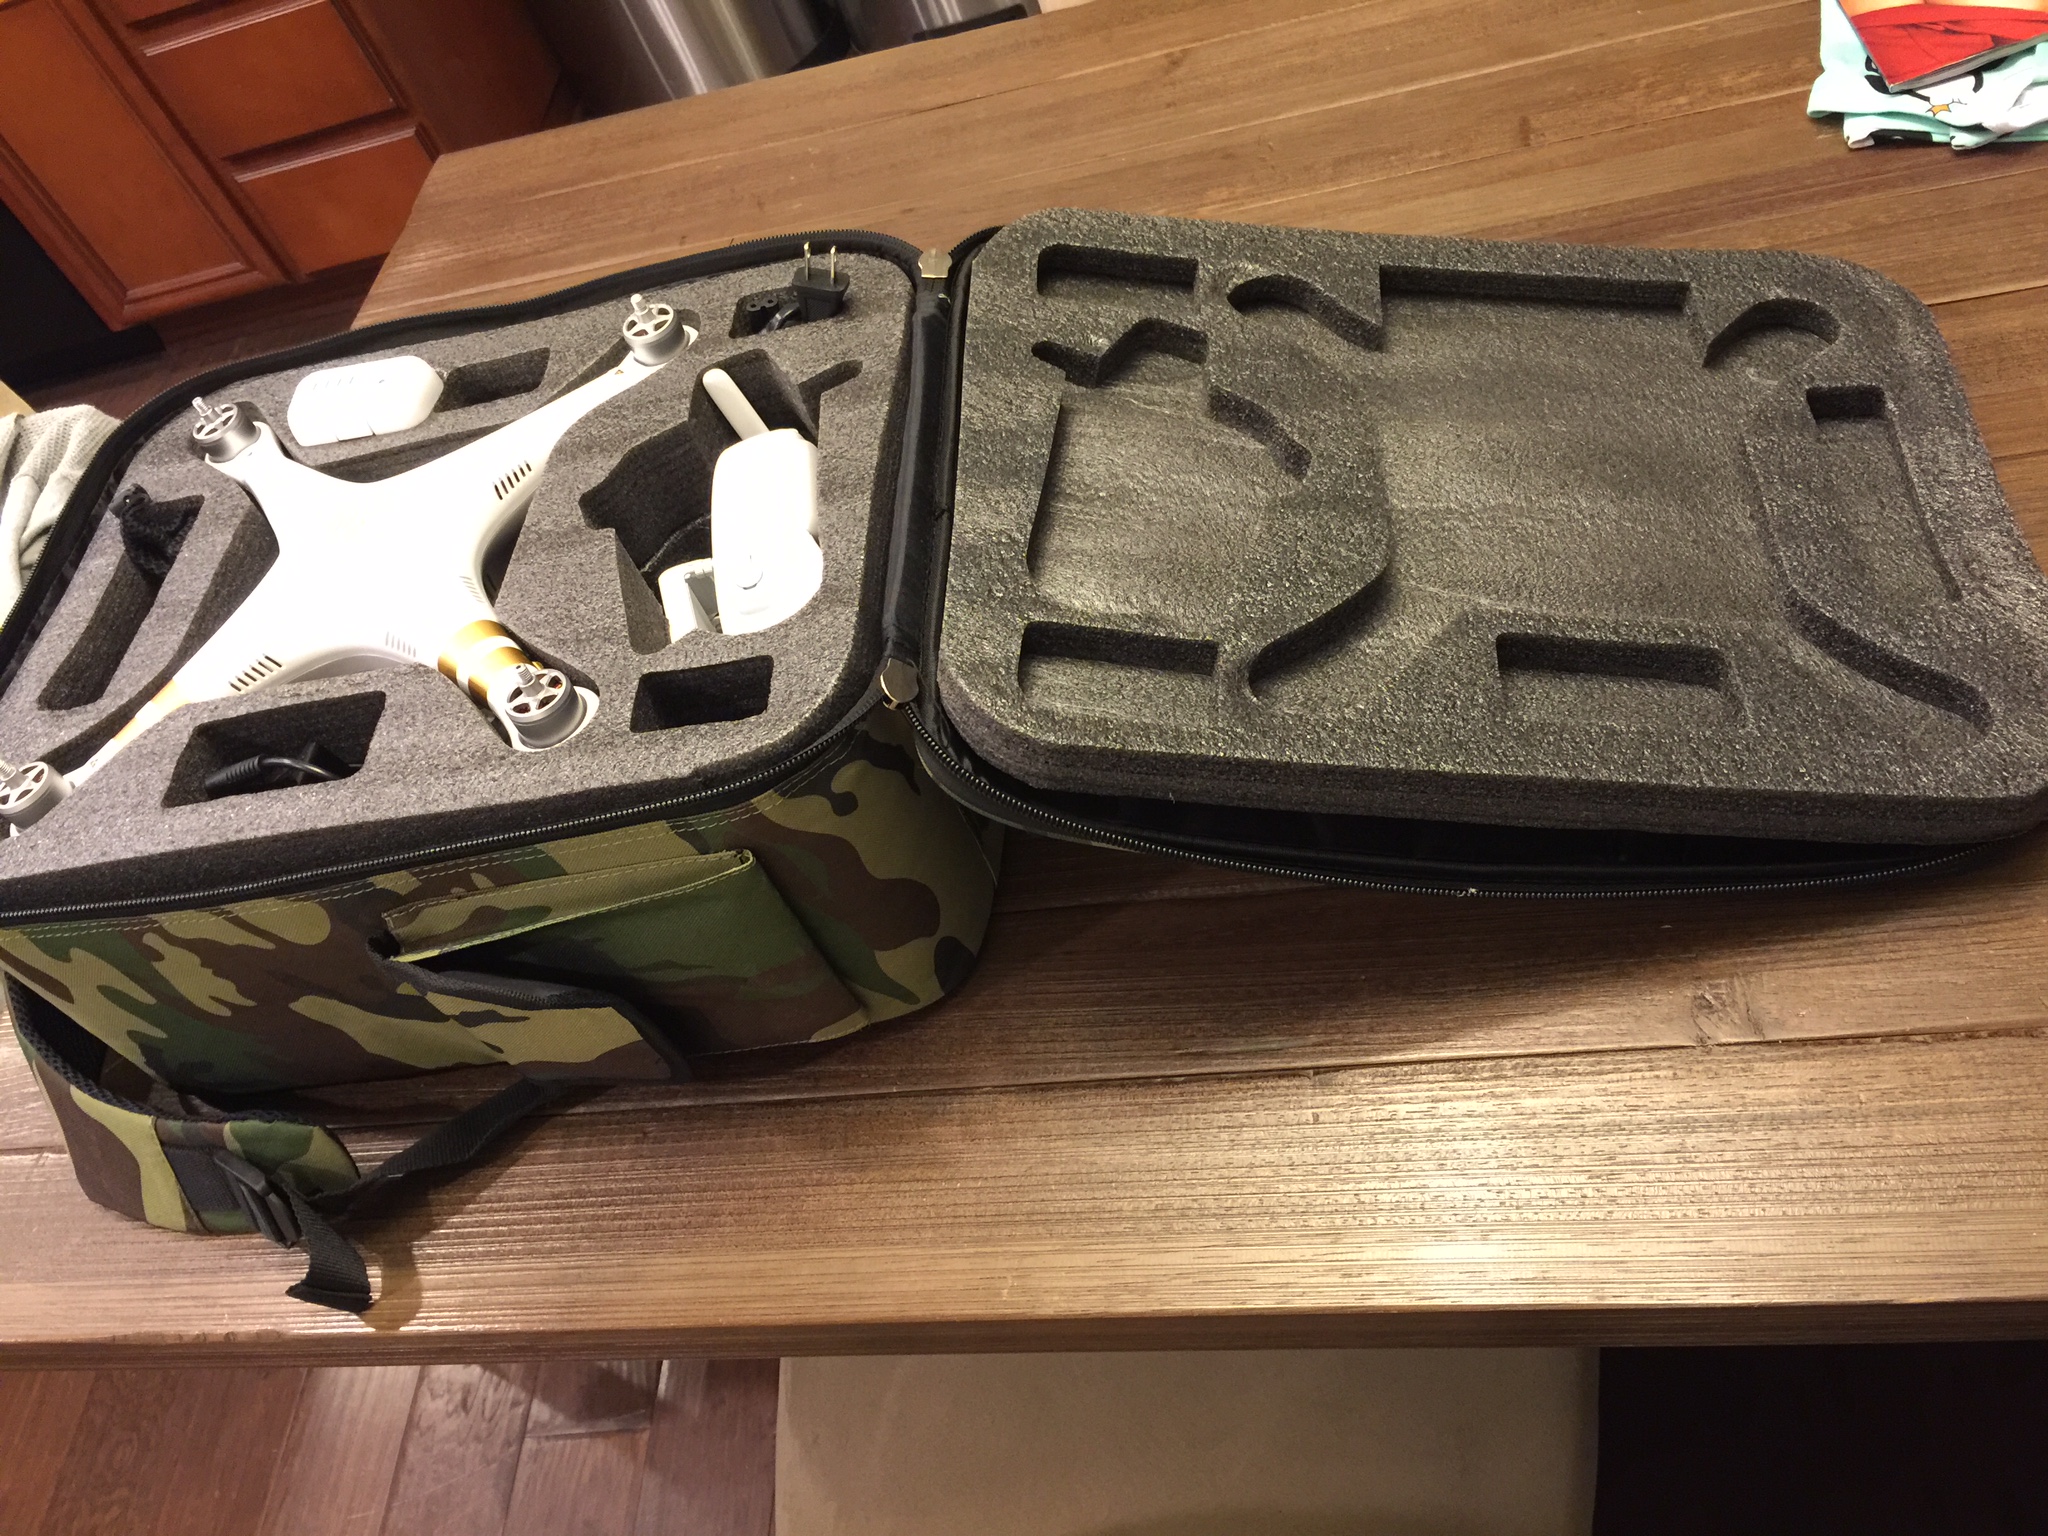 P3 cheap backpack case